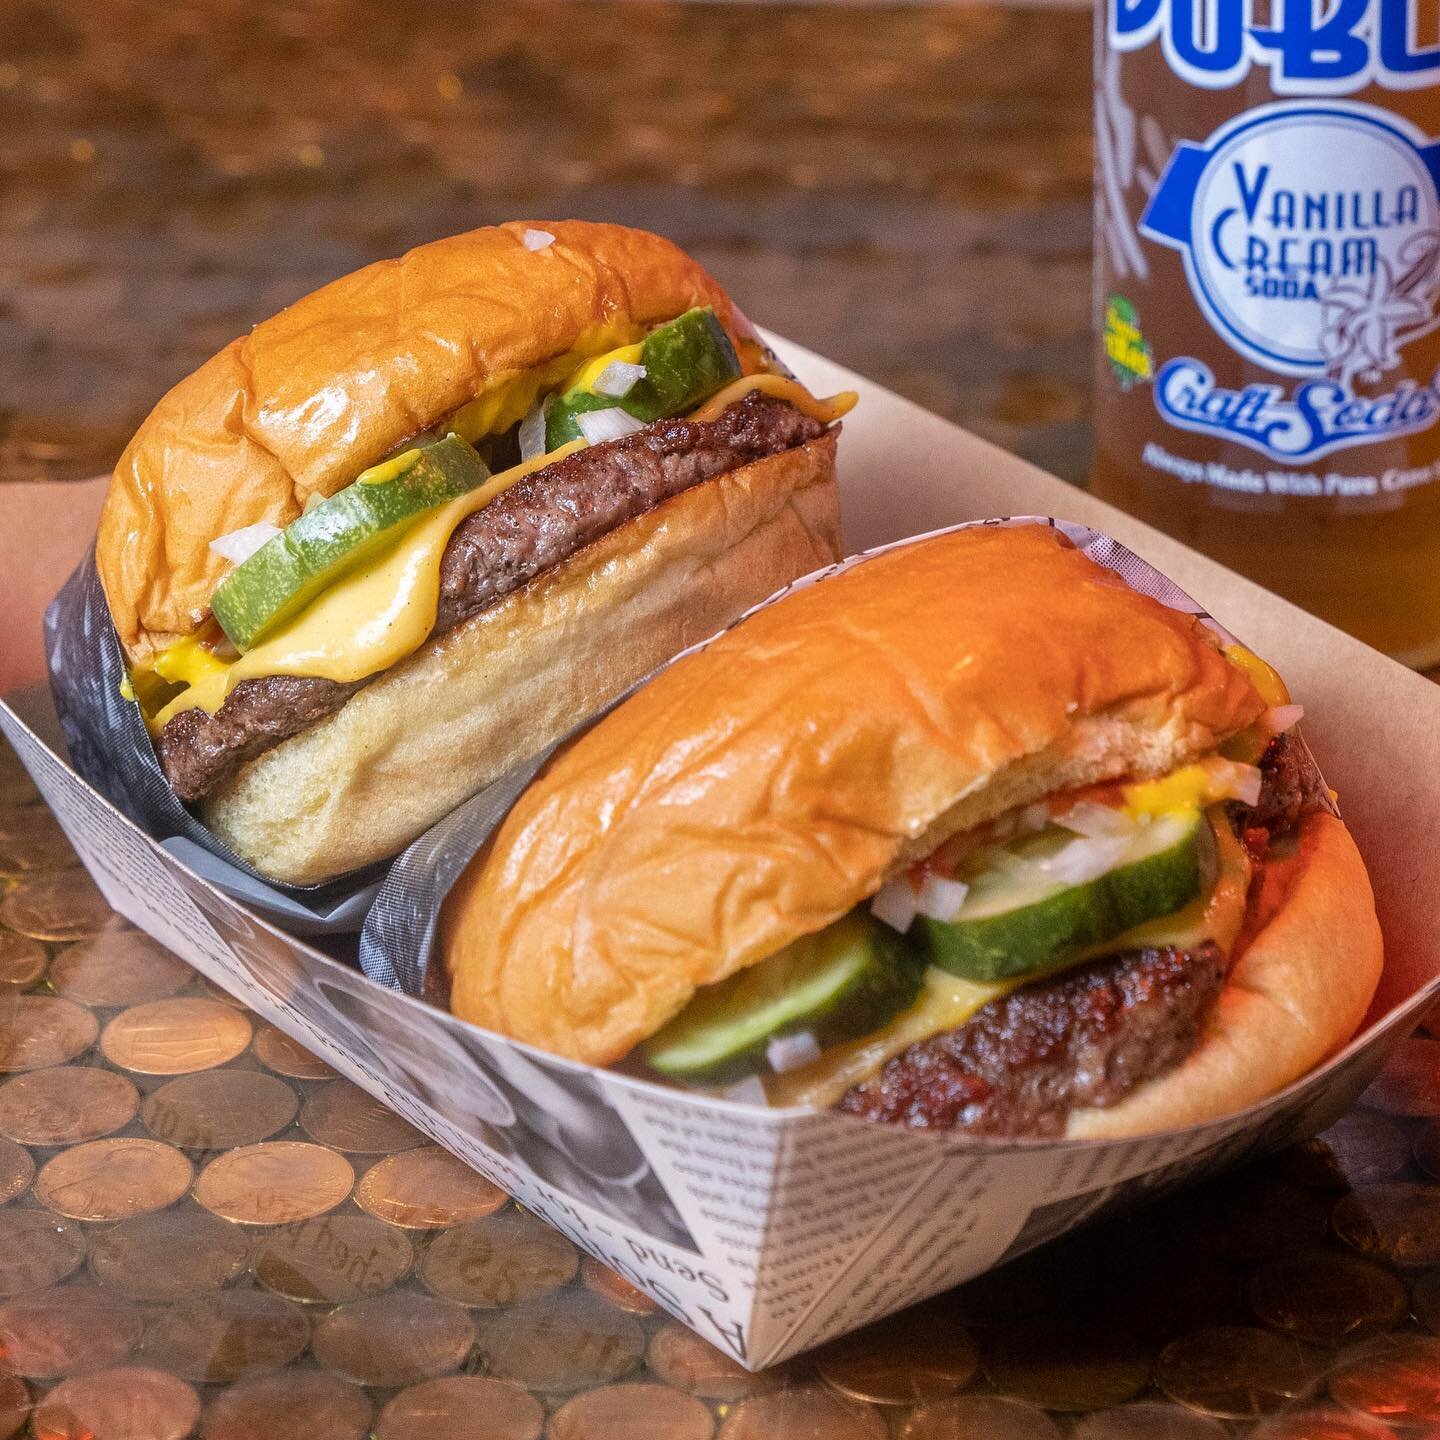 Indulge in delicious juice cheeseburgers one last time at @railwaymarkethtx Join us as we savor our final day before we embark on an exciting journey to our new location. 

Stay tuned for updates on our grand reopening - we can't wait to share our ne